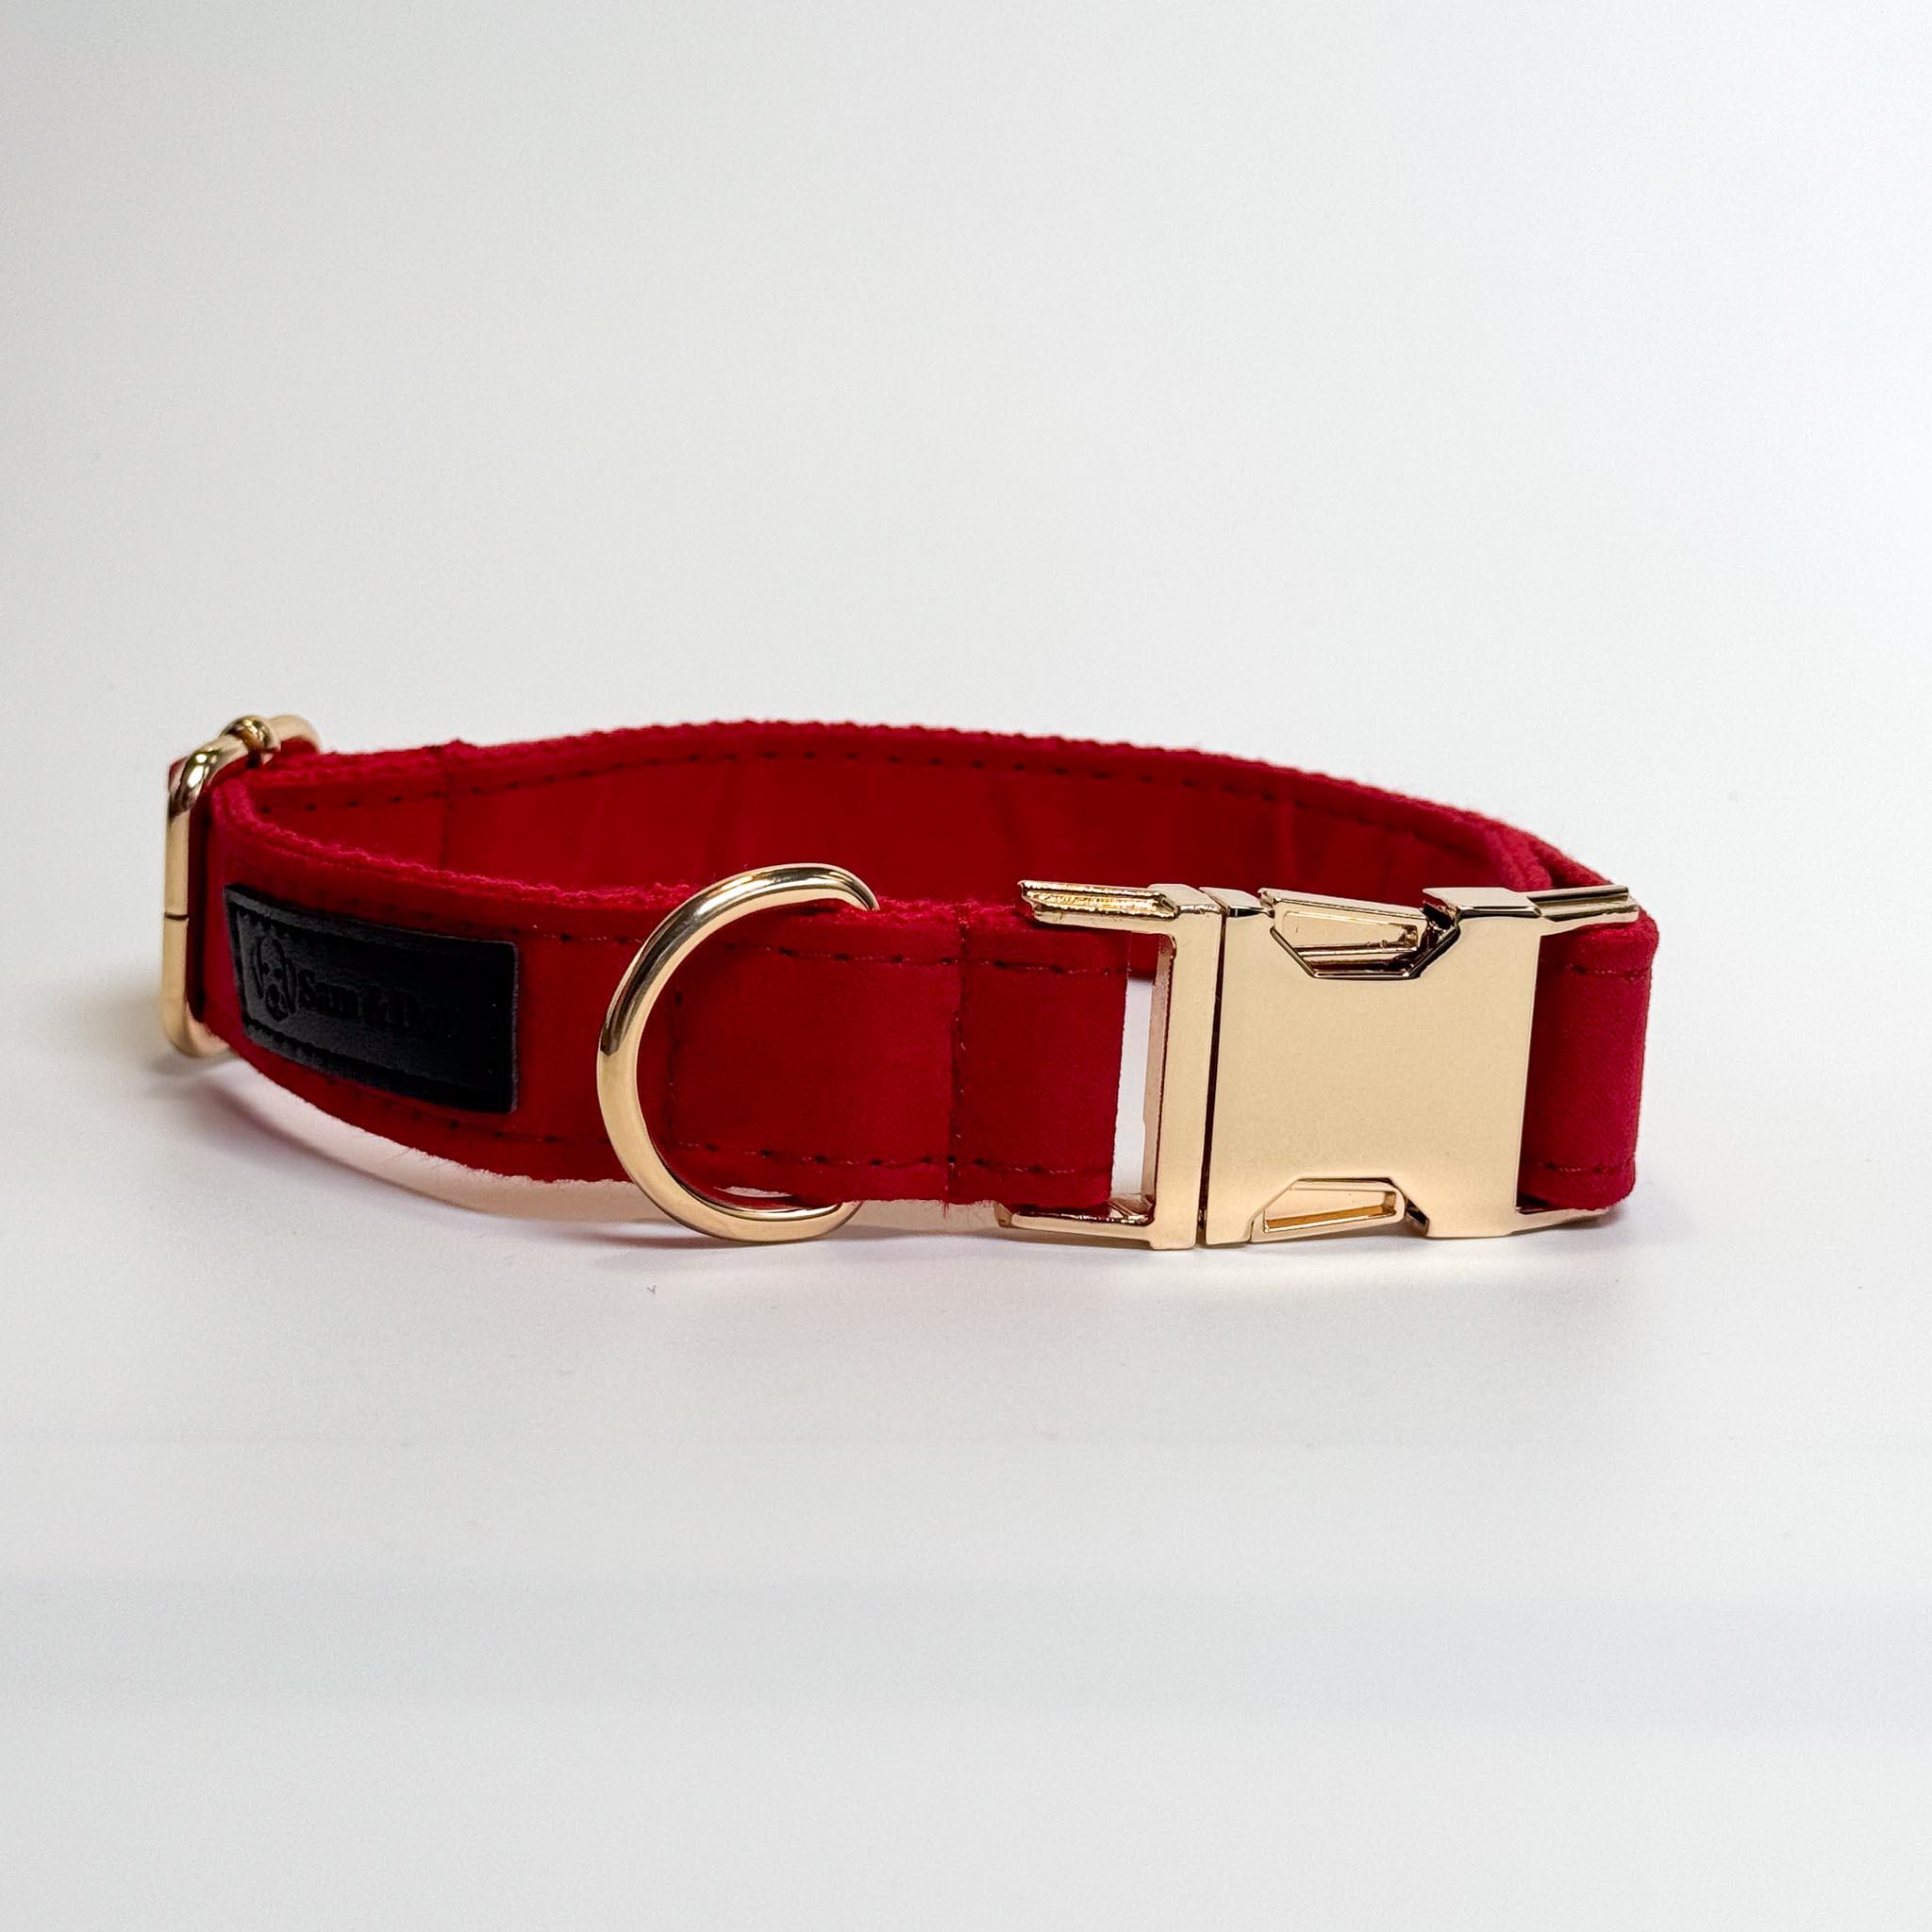 Fire Engine Red Engraved Dog Collar